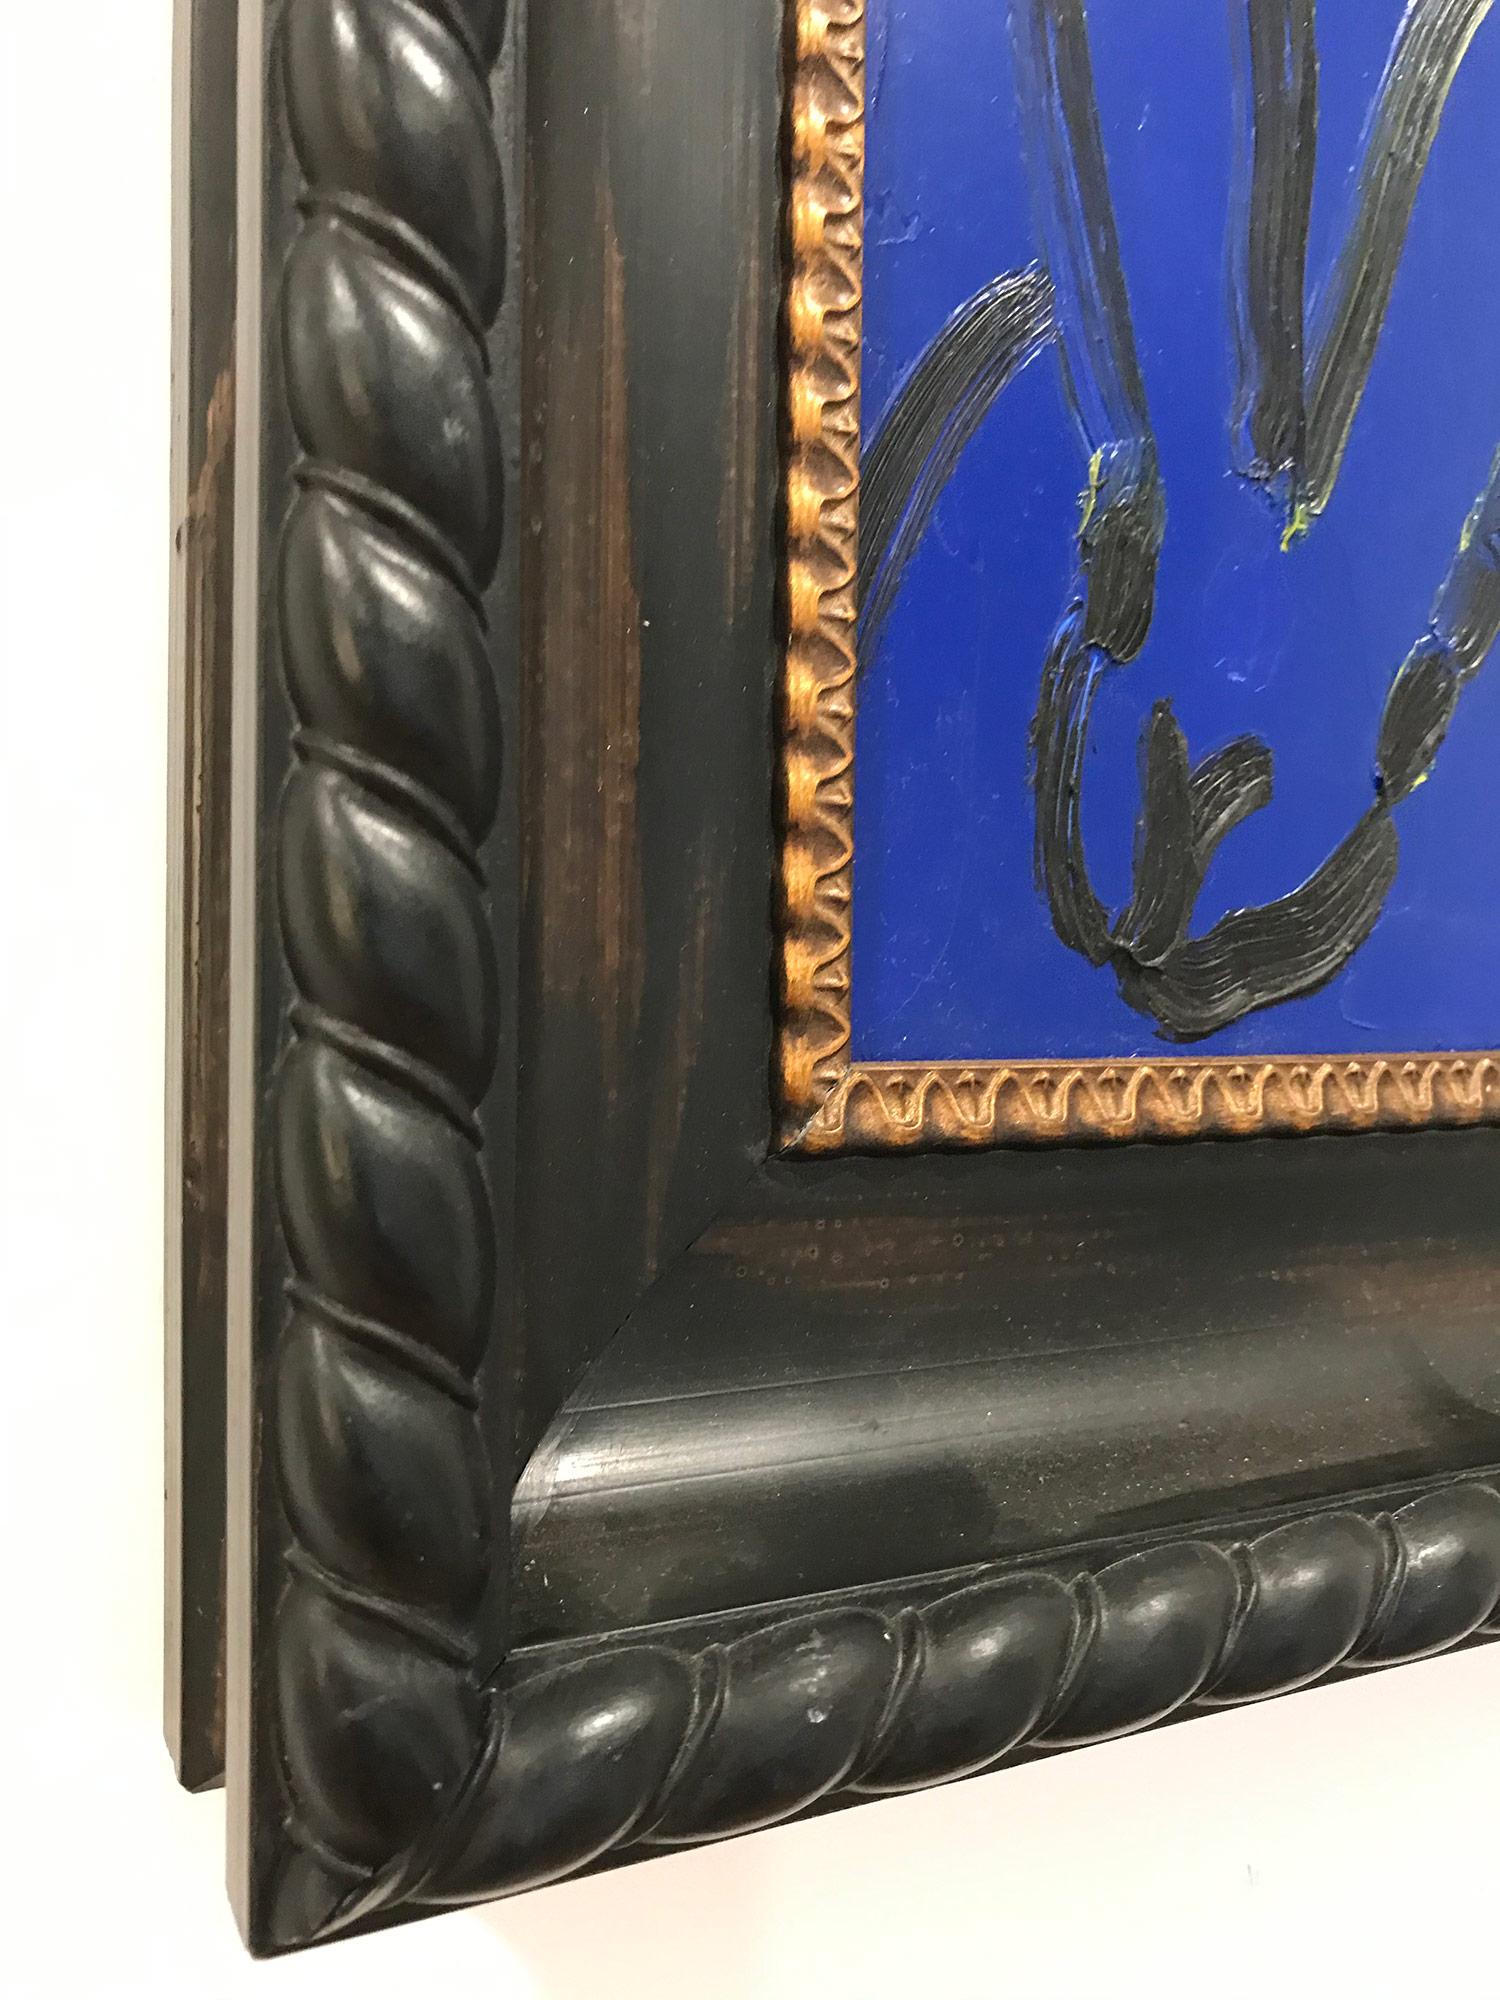 A wonderful composition of one of Slonem's most iconic subjects, Bunnies. This piece depicts a gestural figure of a black bunny on a Mid Night Blue background with thick use of paint. It is housed in a wonderful antique style Gothic wood frame.